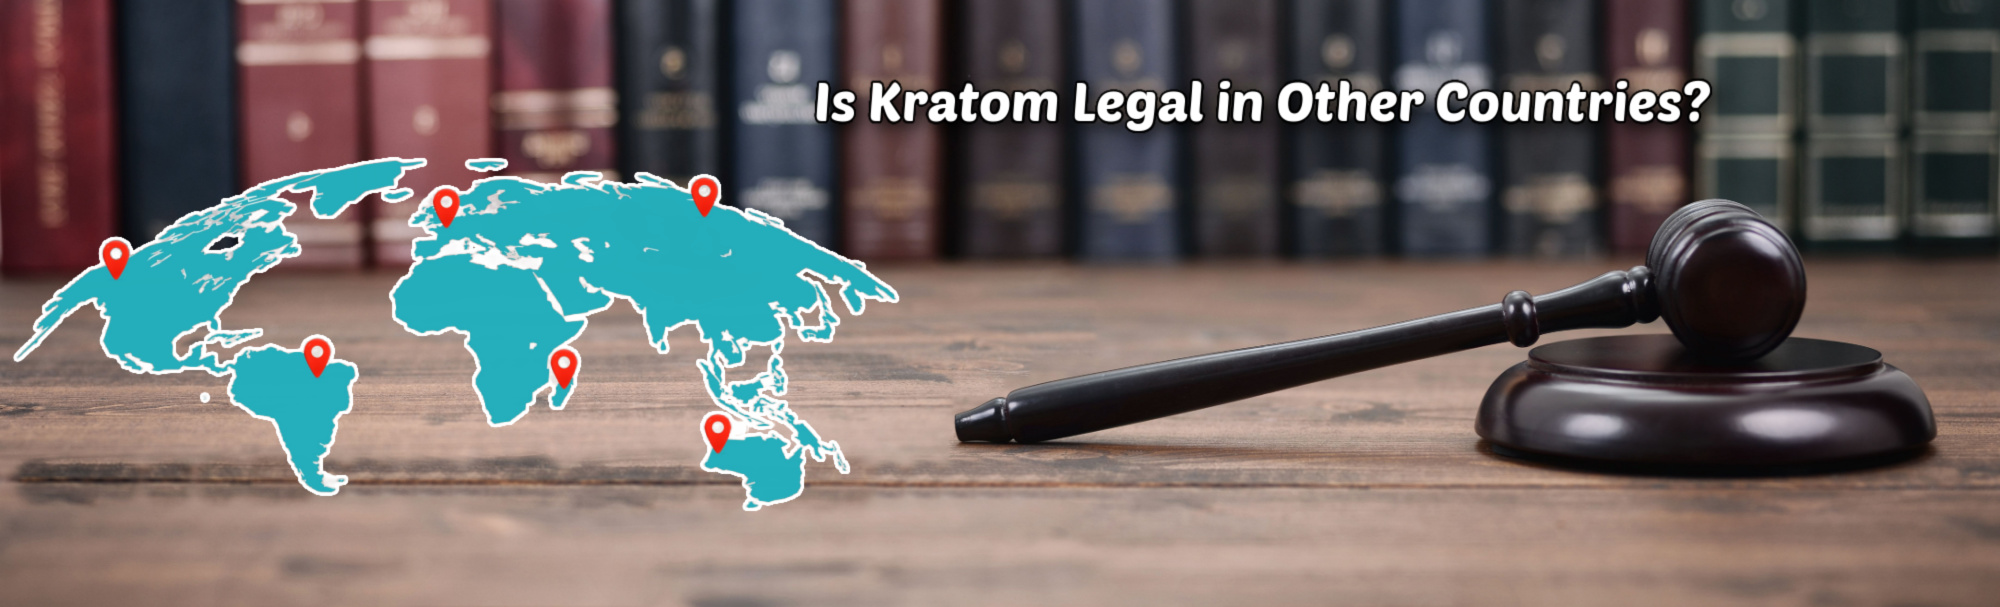 image of is kratom legal in other countries